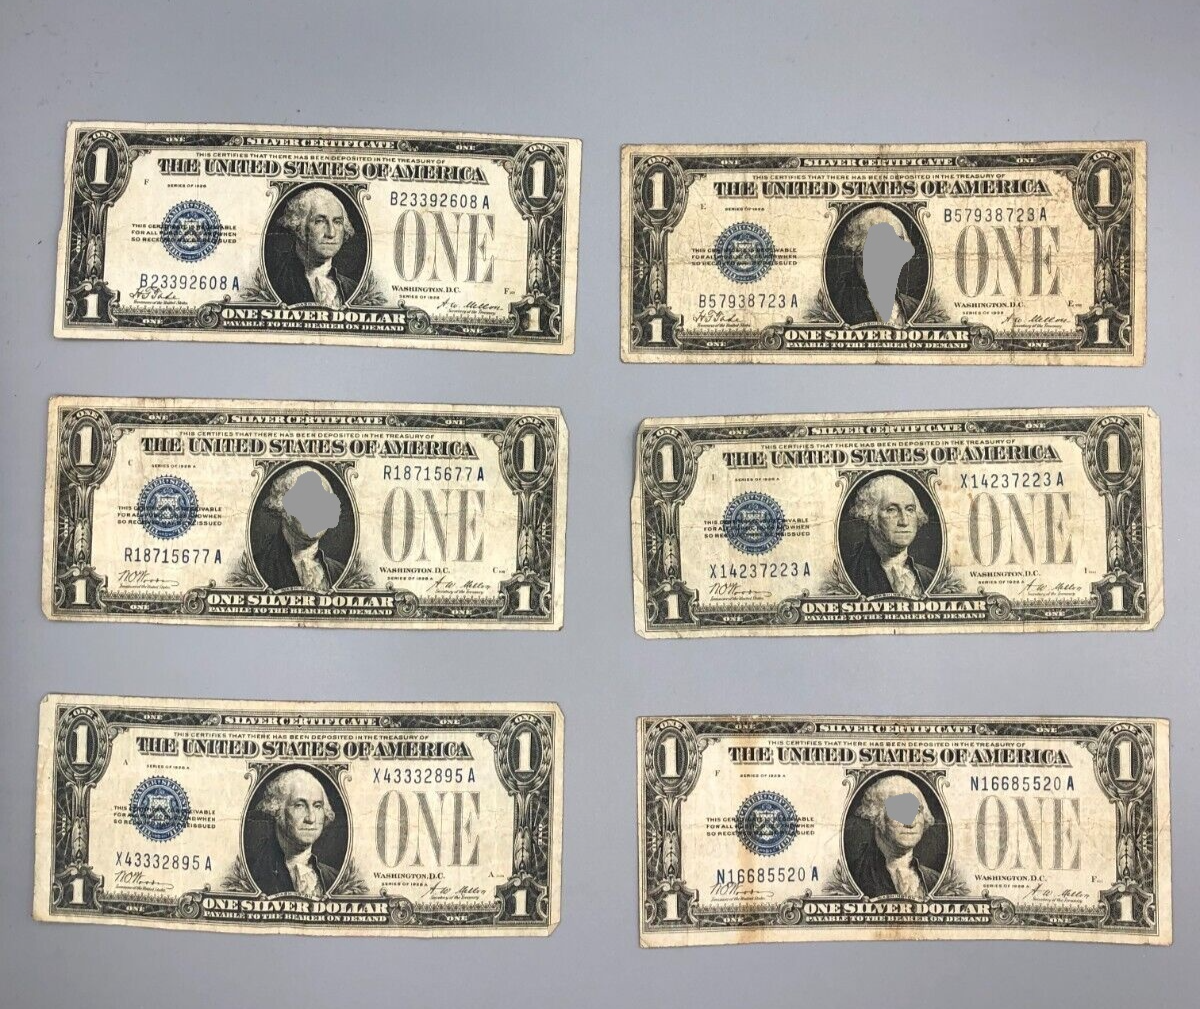 EP19: Vintage 1928 $1 Bills “Funny Back” notes /Lot of 6 -Good Condition Free SH